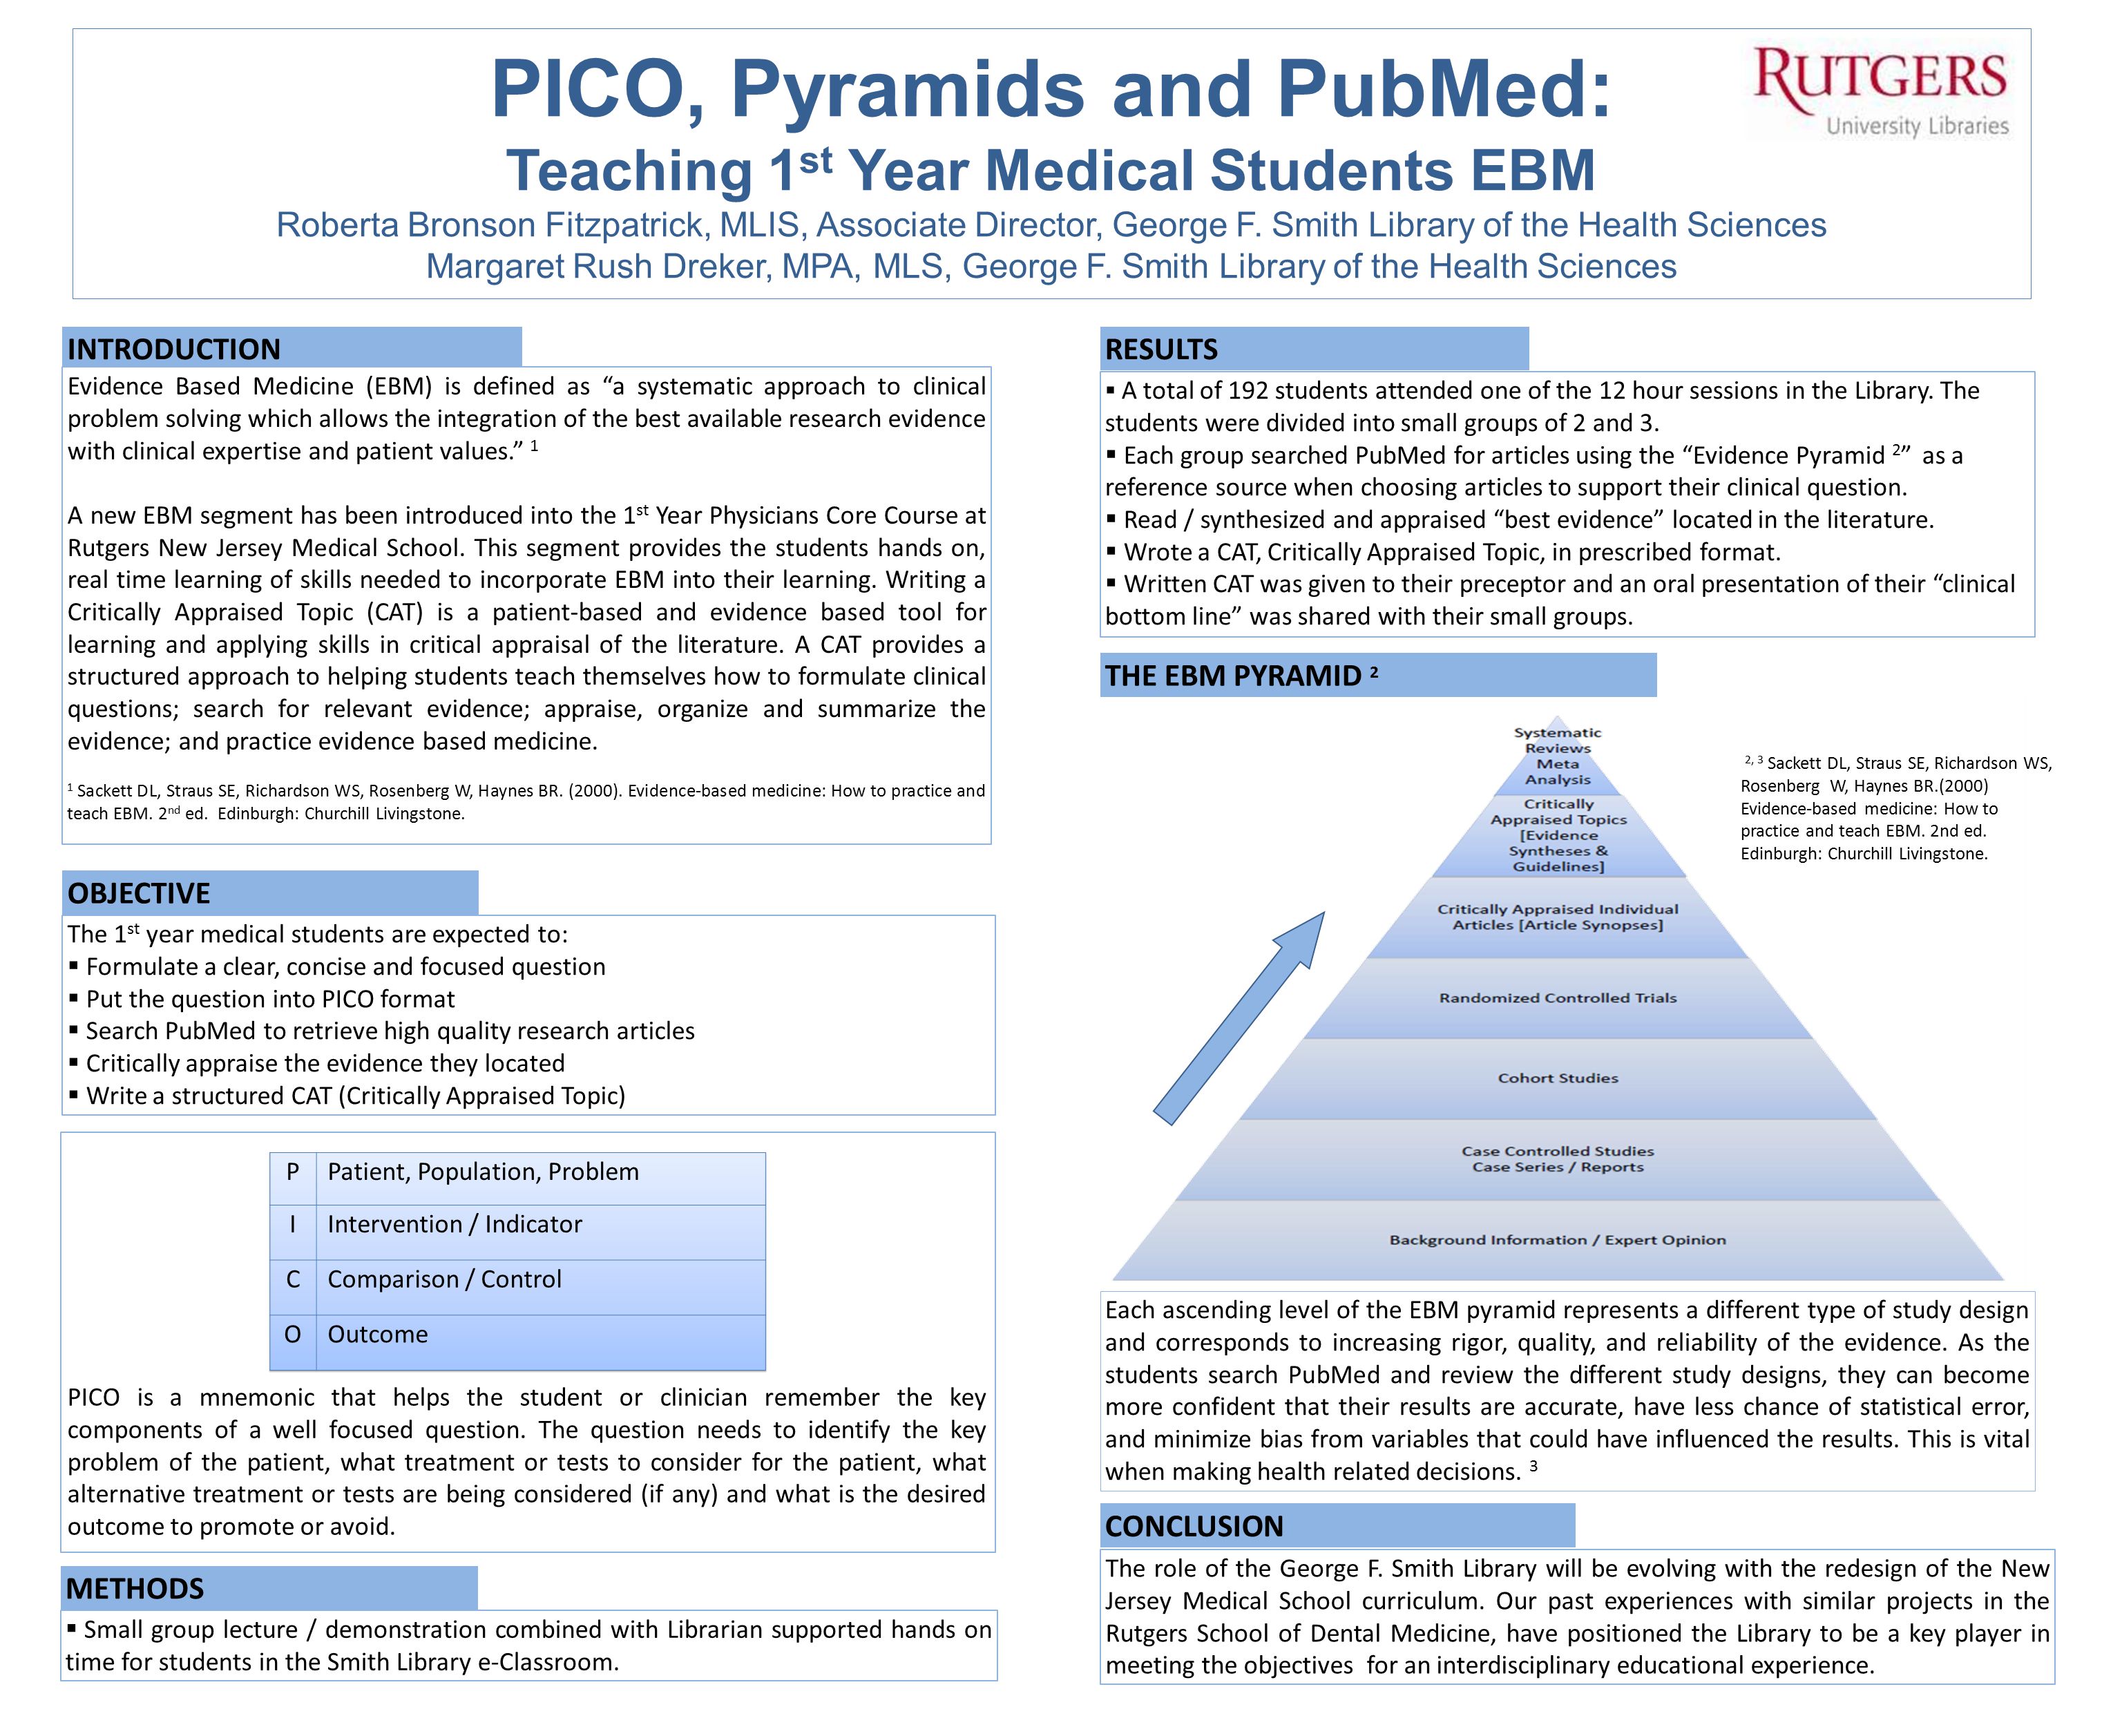 PICO, Pyramids and PubMed: Teaching 1st Year Medical Students EBM